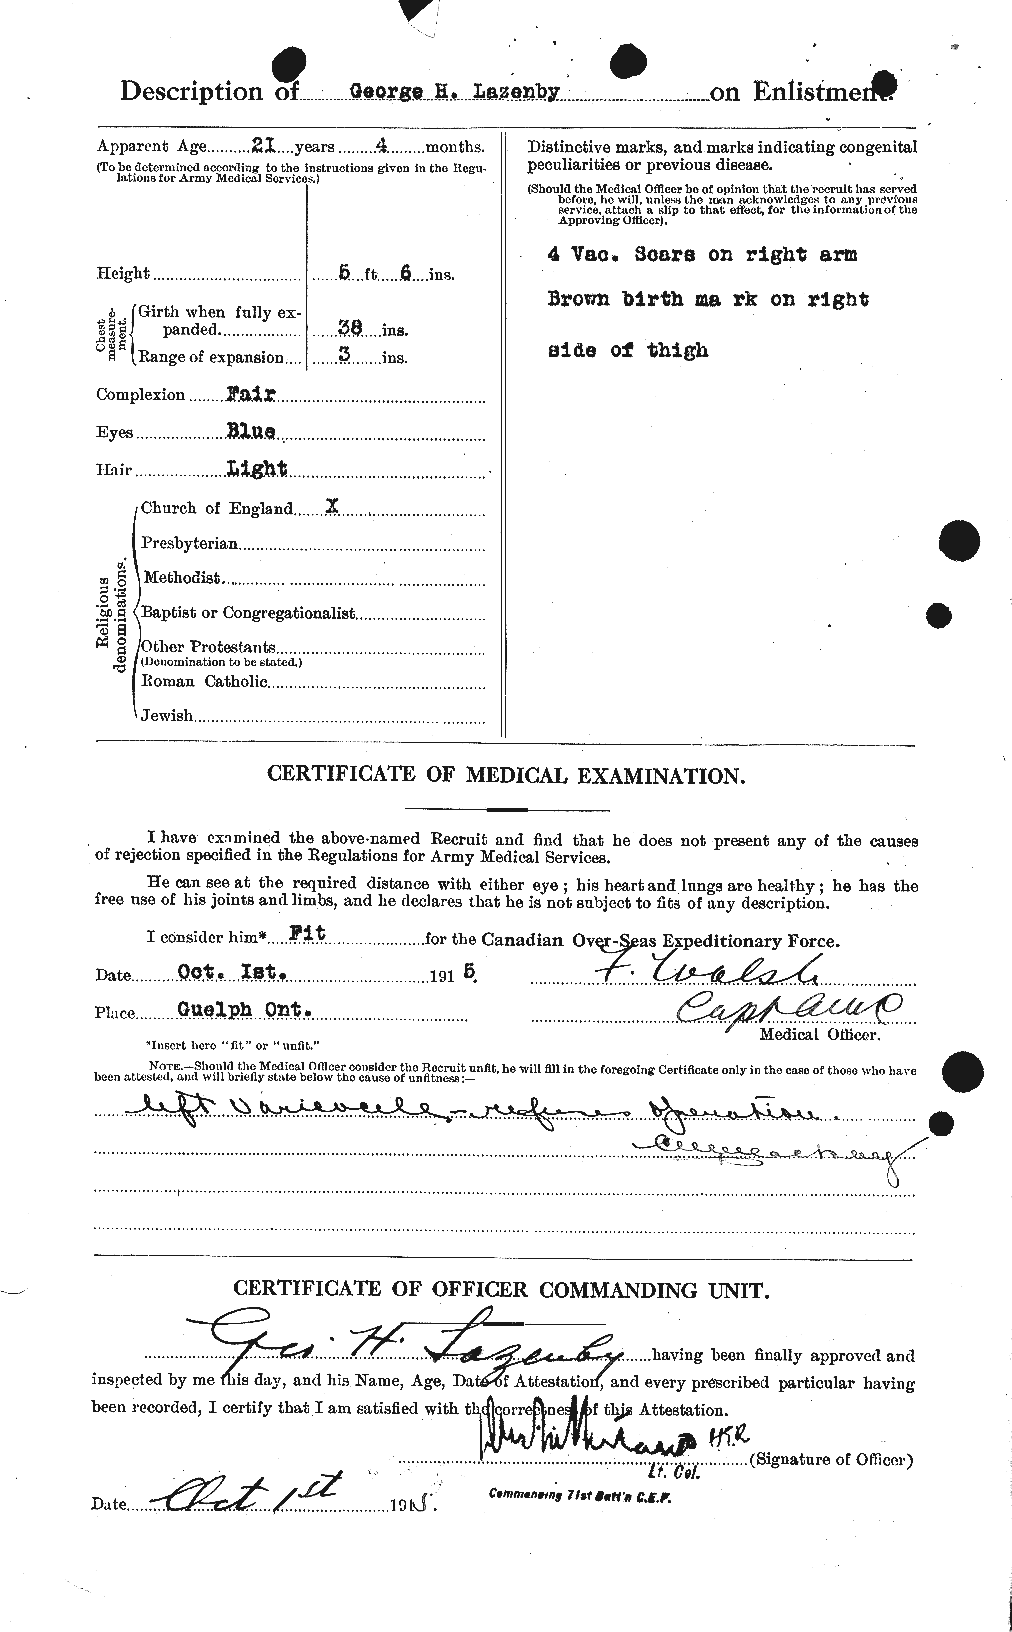 Personnel Records of the First World War - CEF 453201b